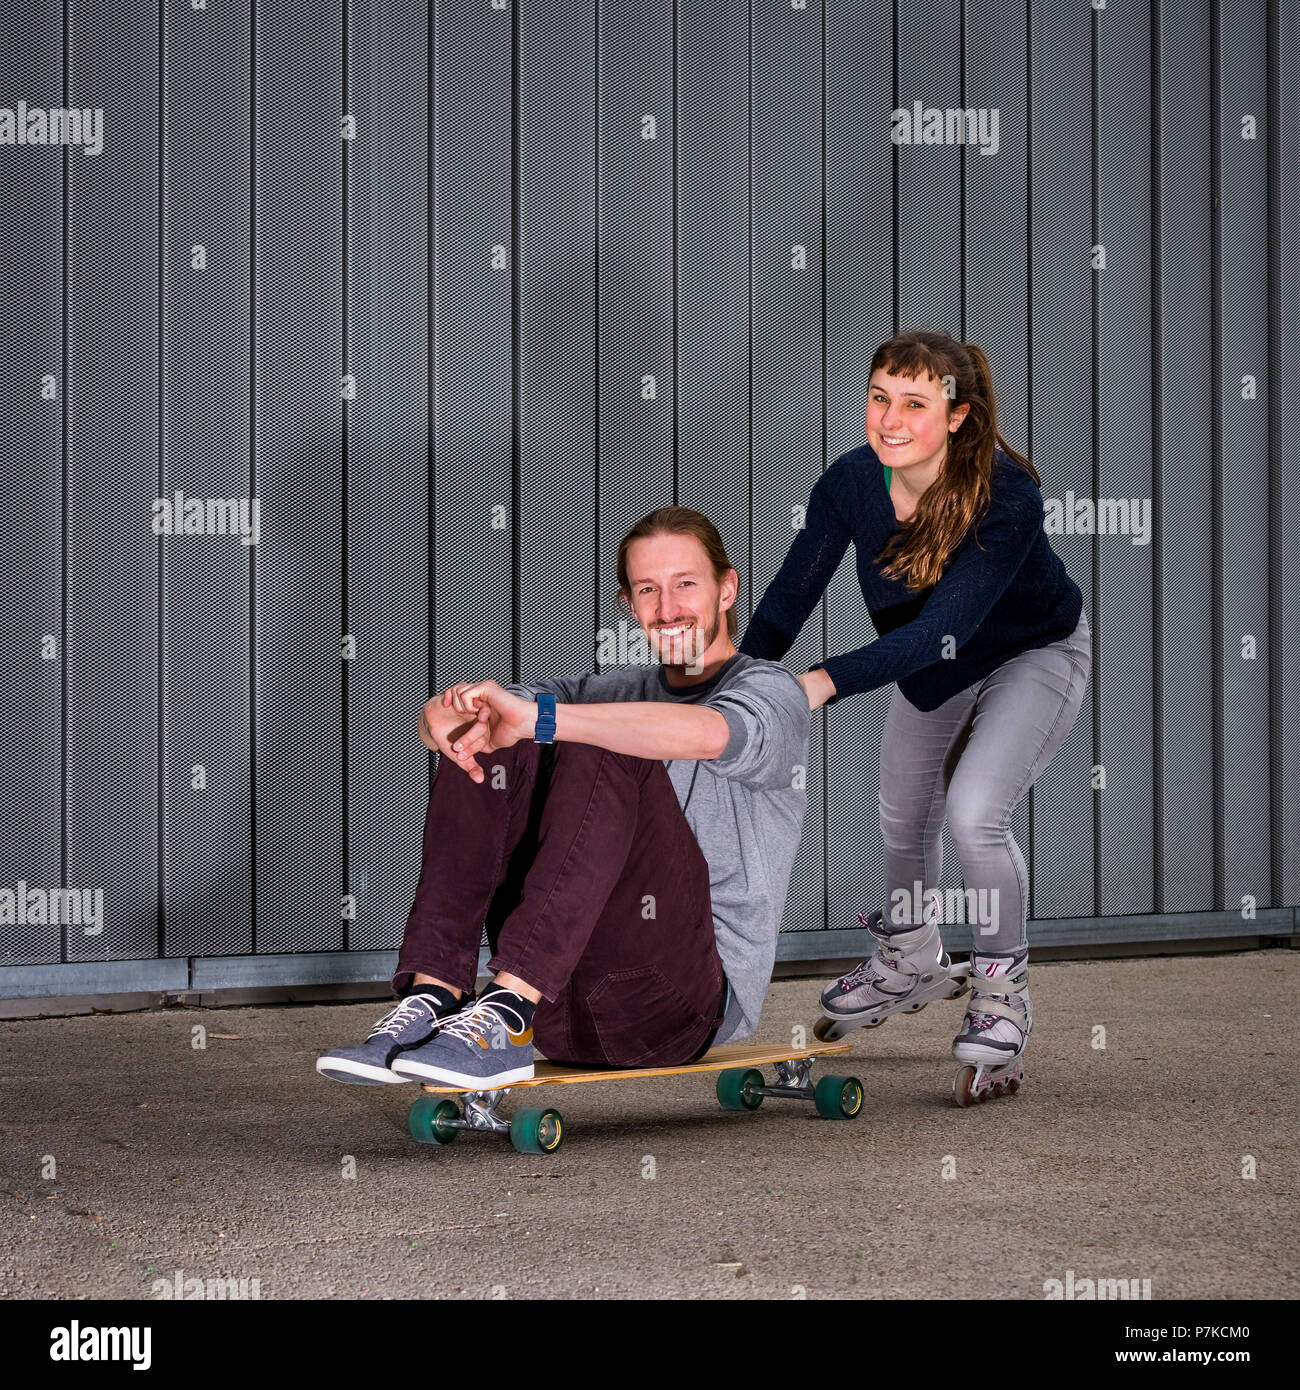 Man with longboard, 28 years old, teenager with inline skates, female, urban environment Stock Photo